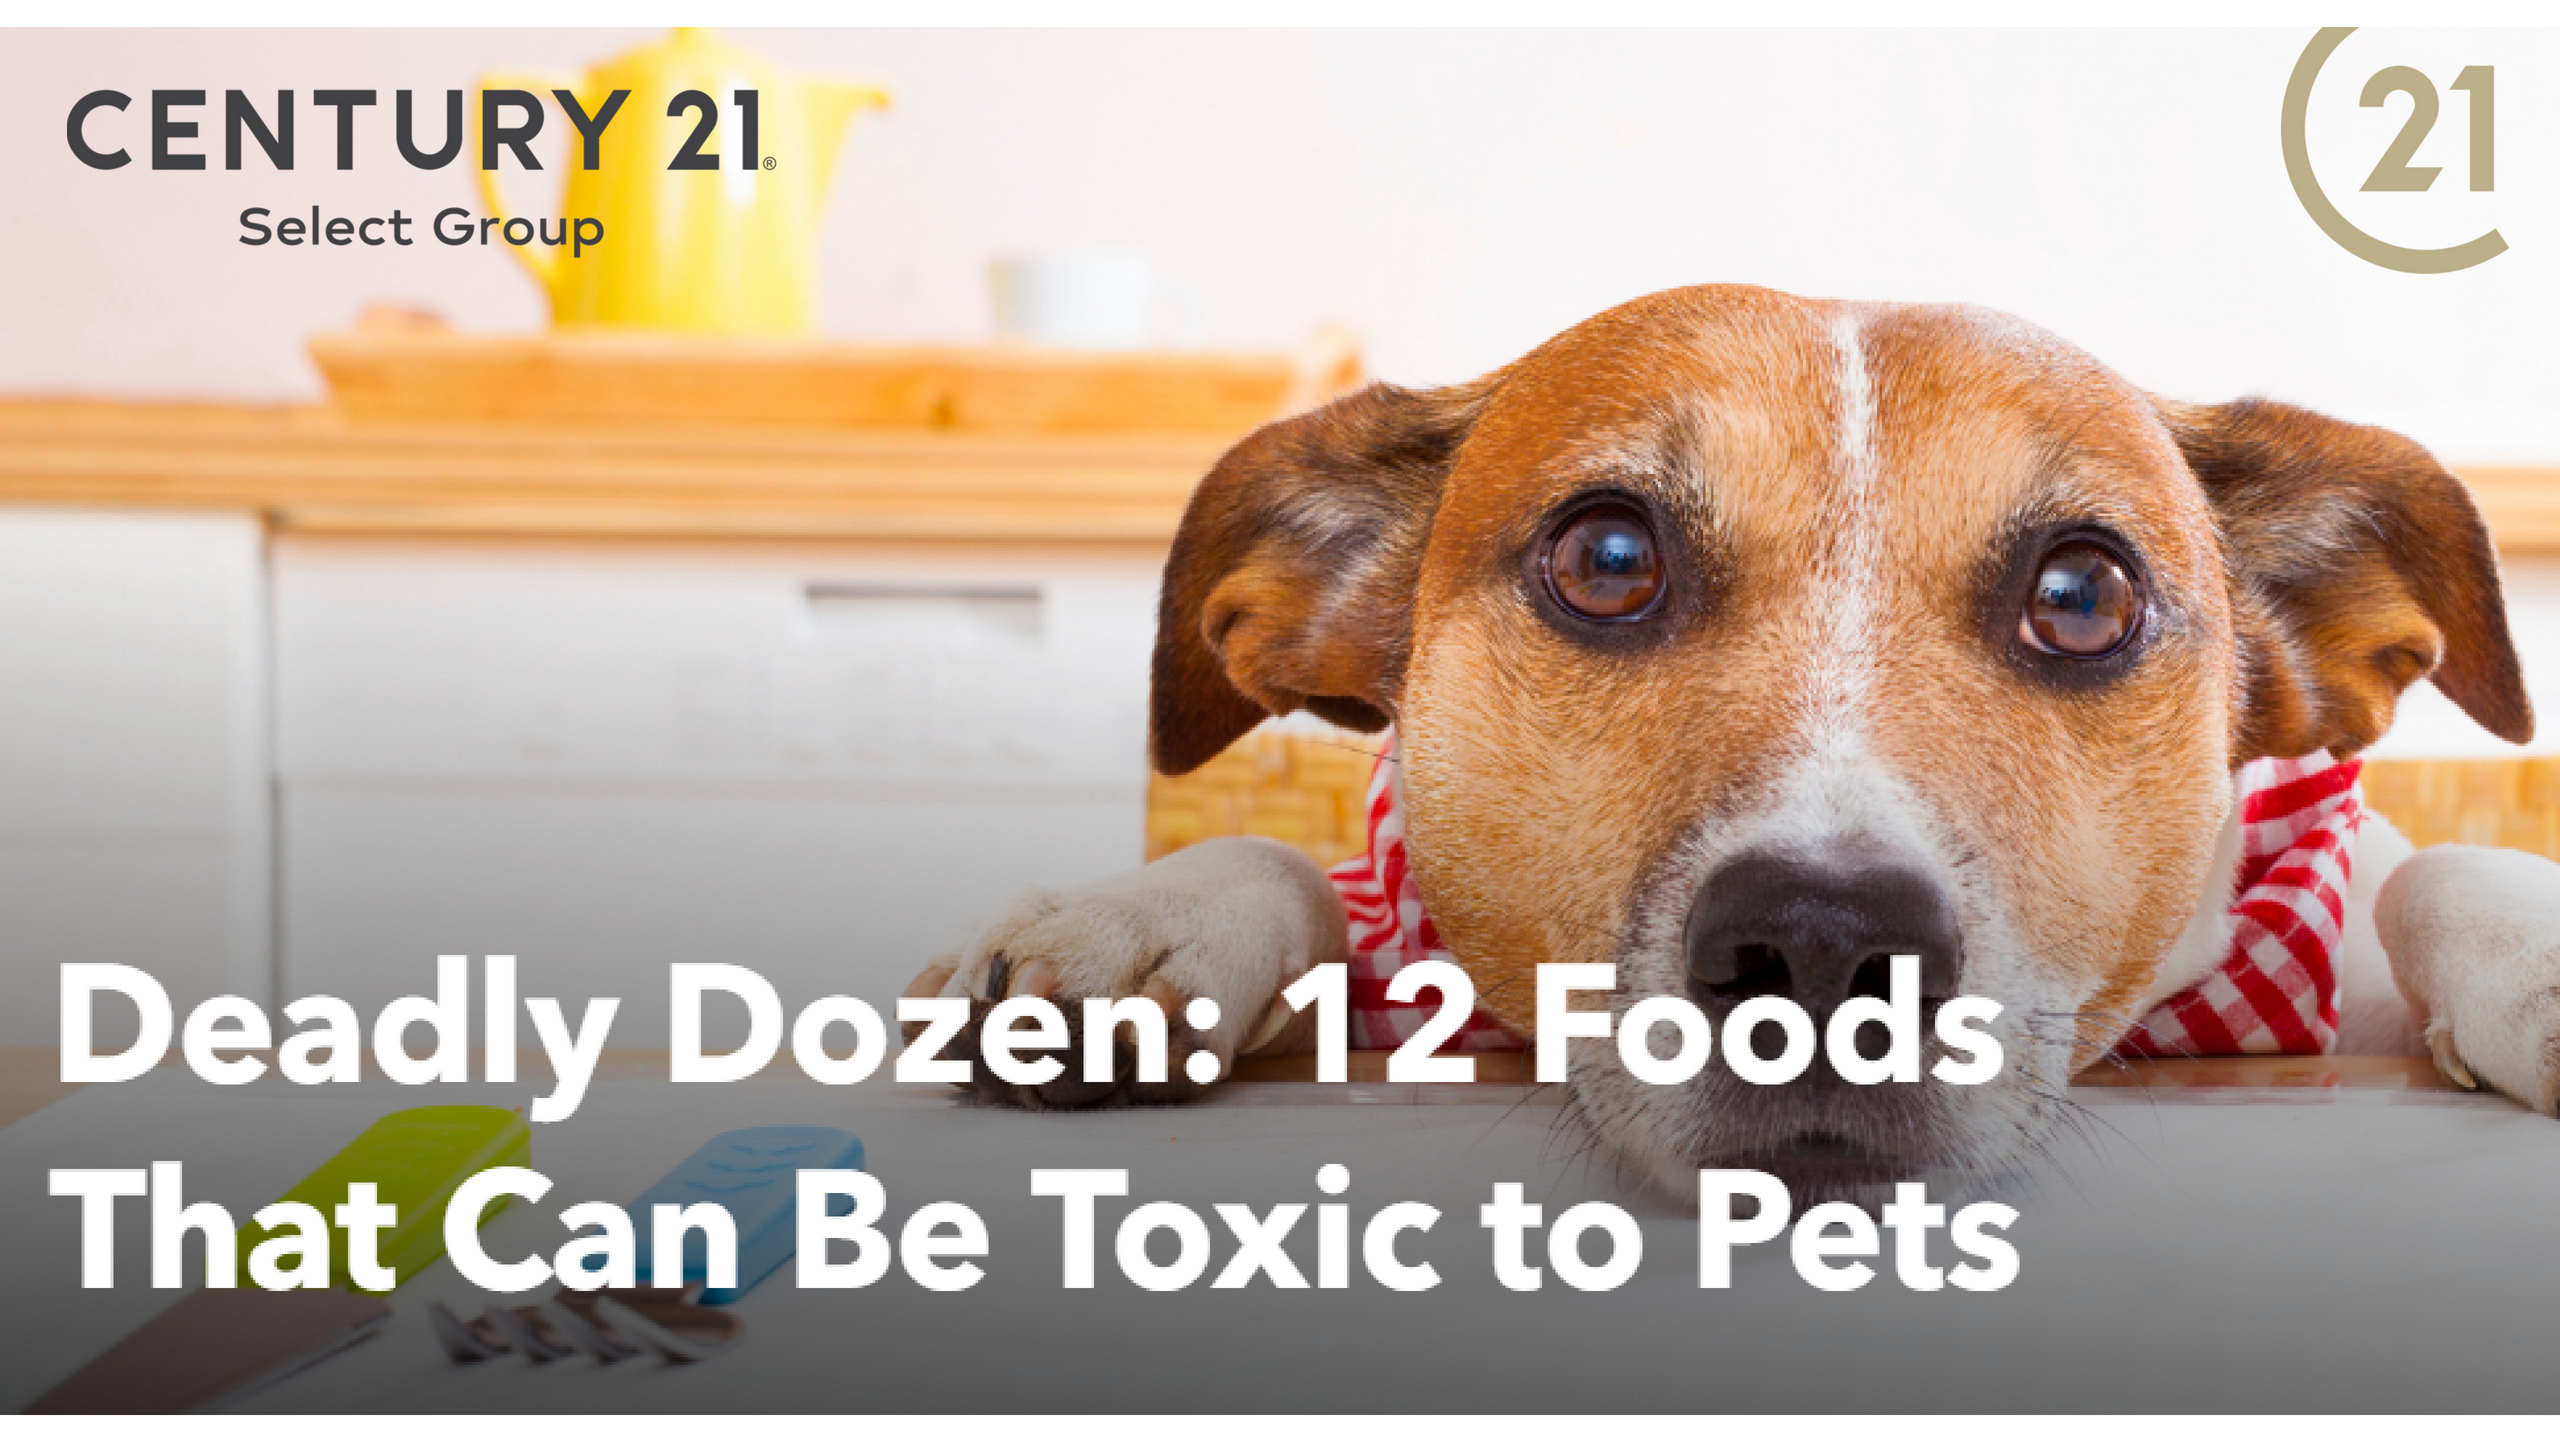 Deadly Dozen: 12 Foods That Can Be Toxic to Pets